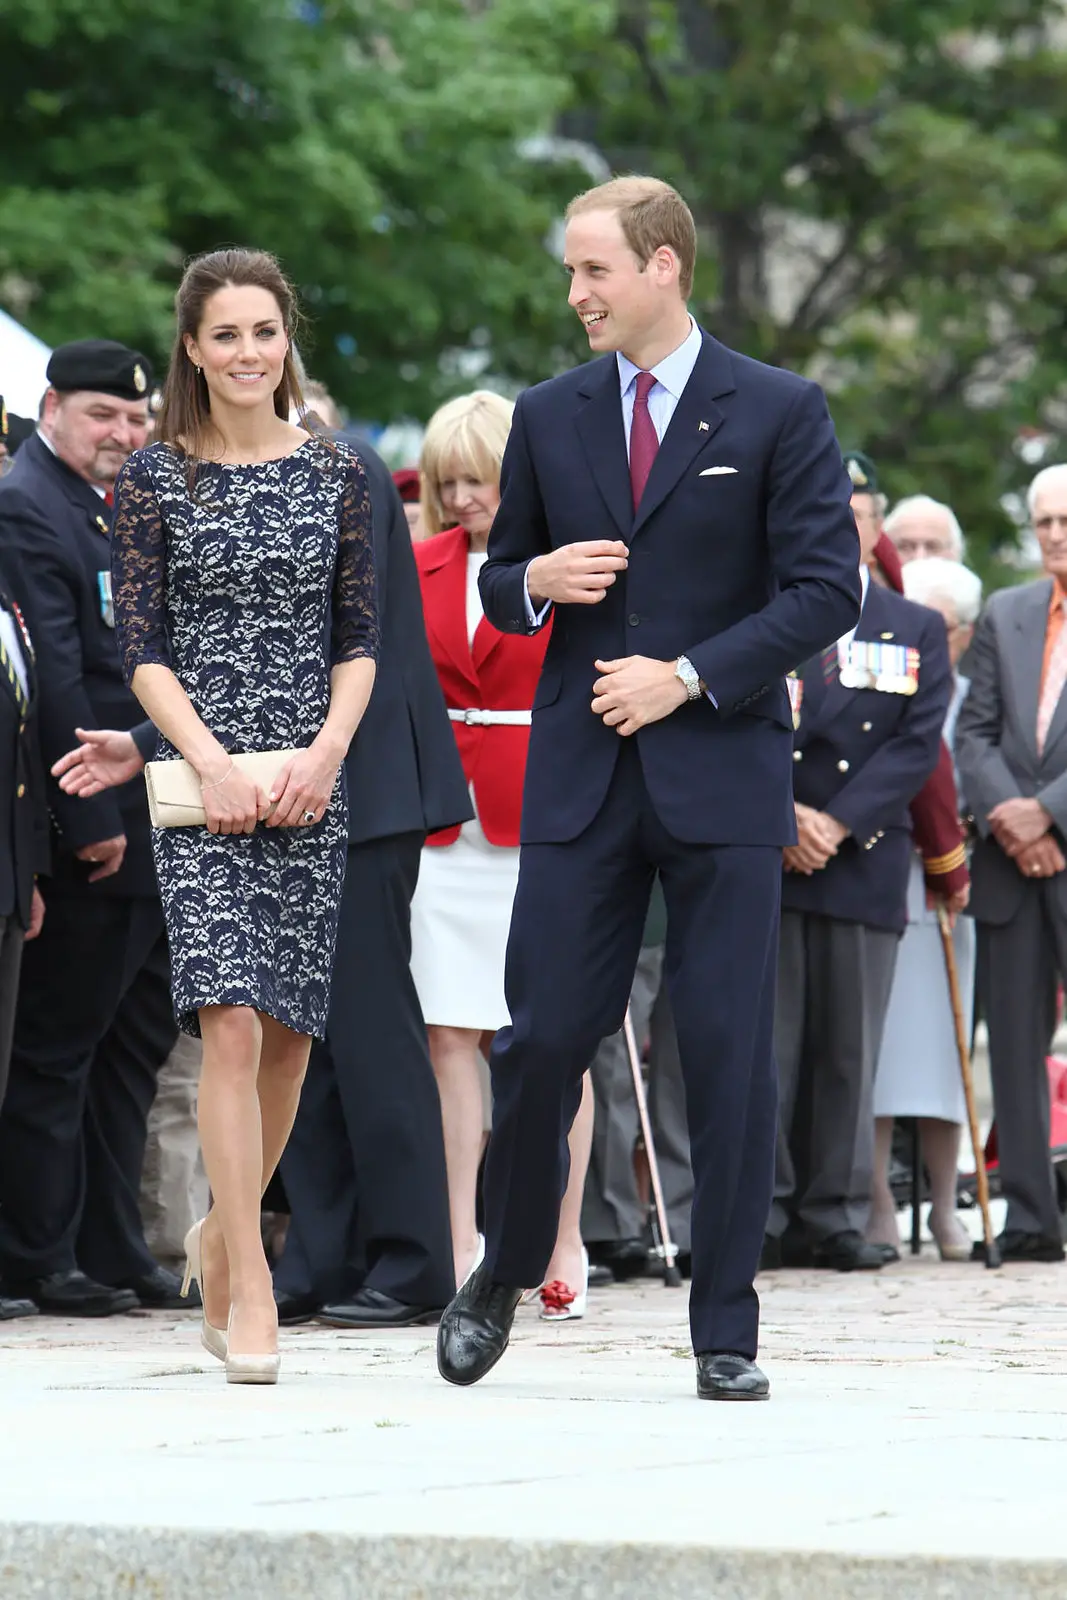 The Duke and Duchess of Cambridge visited Canada in 2011 after they got married